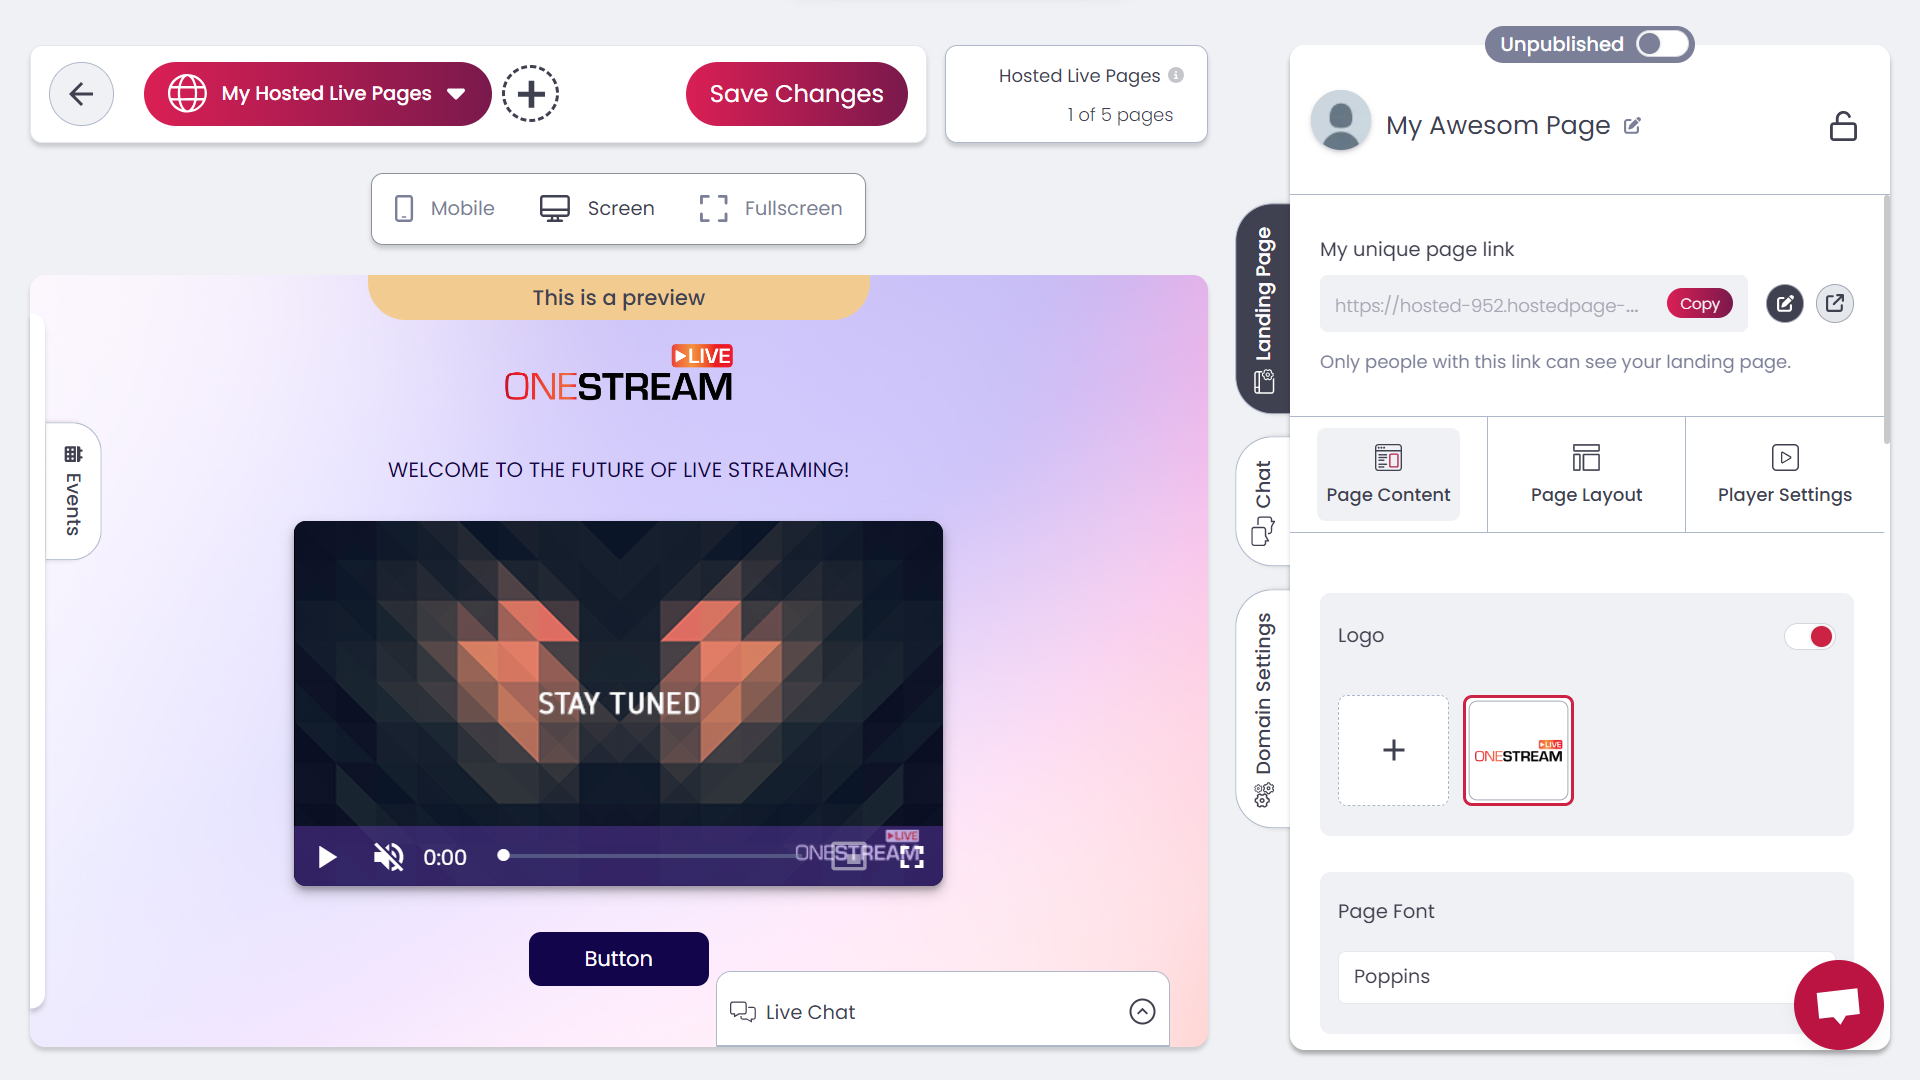 Hosted Live Pages by OneStream Live